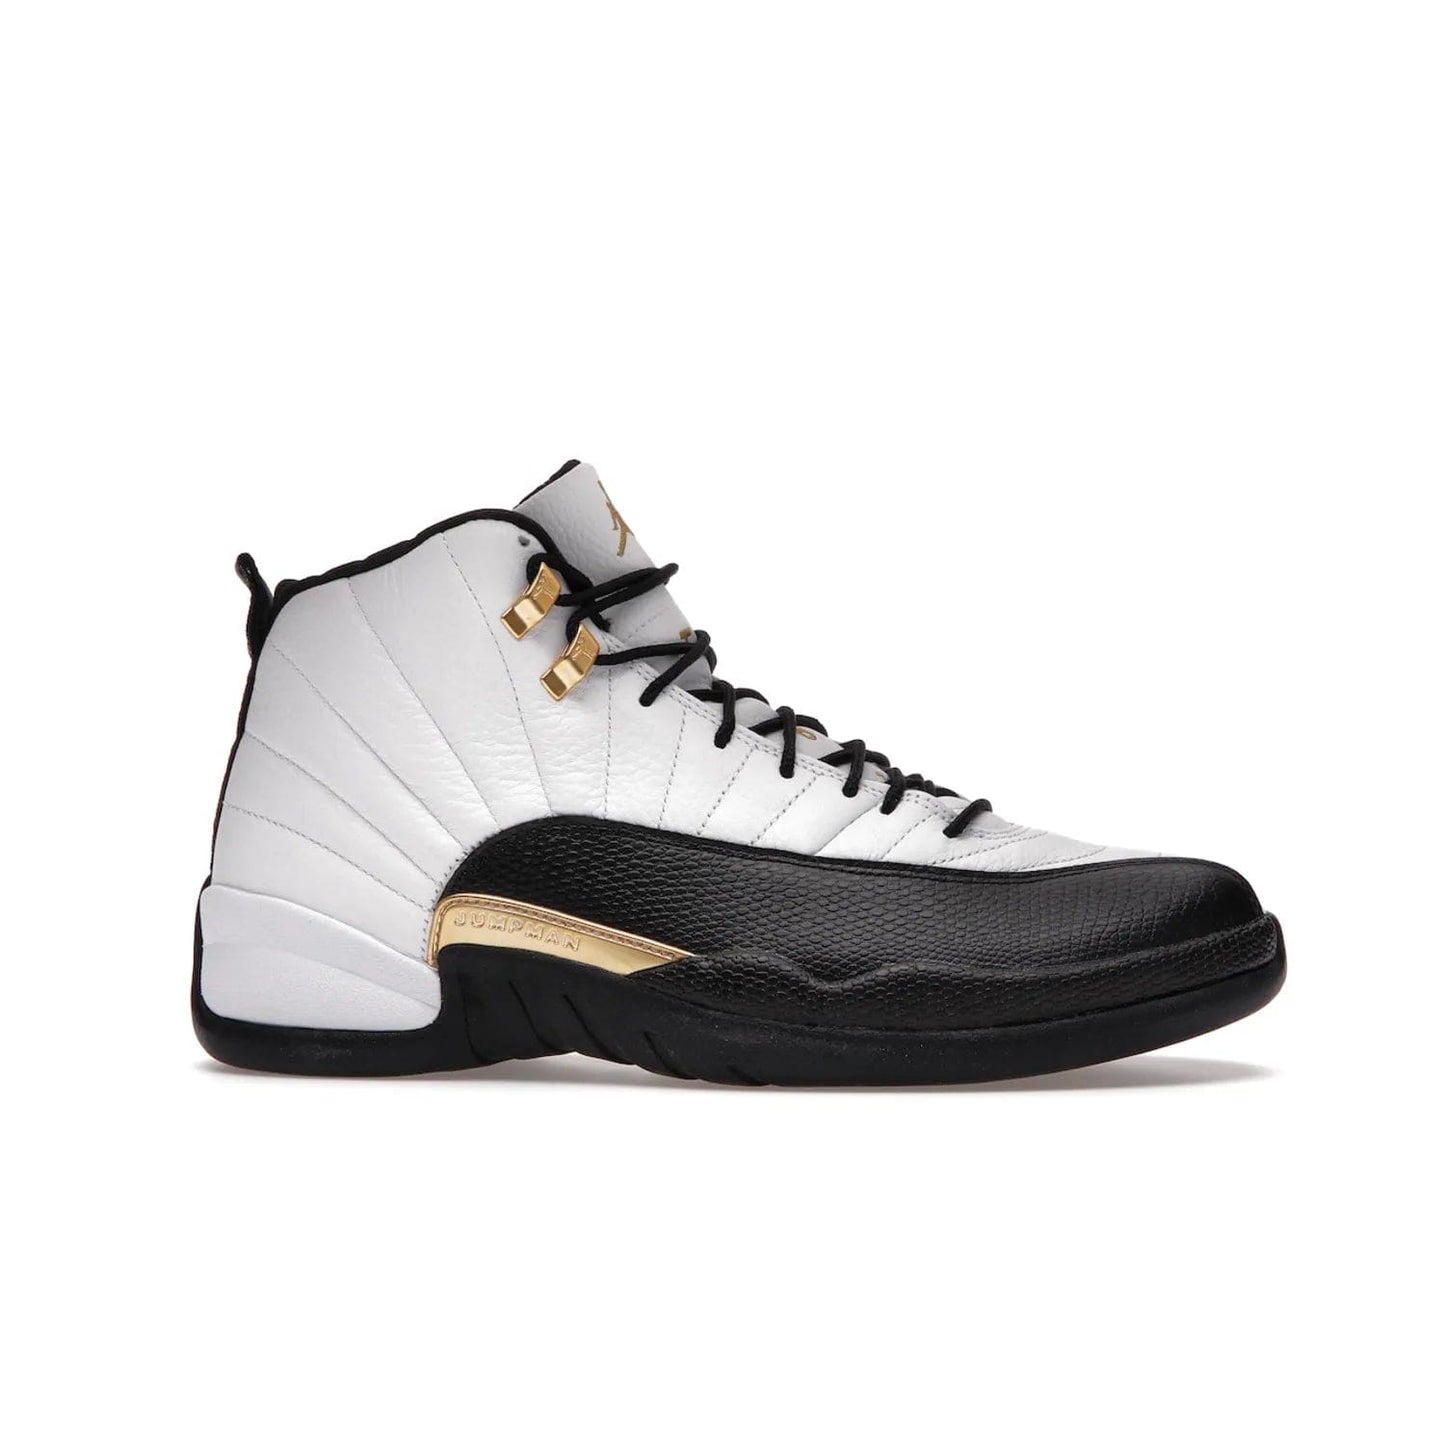 Jordan 12 Retro Royalty Taxi - Image 2 - Only at www.BallersClubKickz.com - Make a statement with the Air Jordan 12 Retro Royalty Taxi. Woven heel tag, gold plaquet, white tumbled leather upper plus a black toe wrap, make this modern take on the classic a must-have. Available in November 2021.